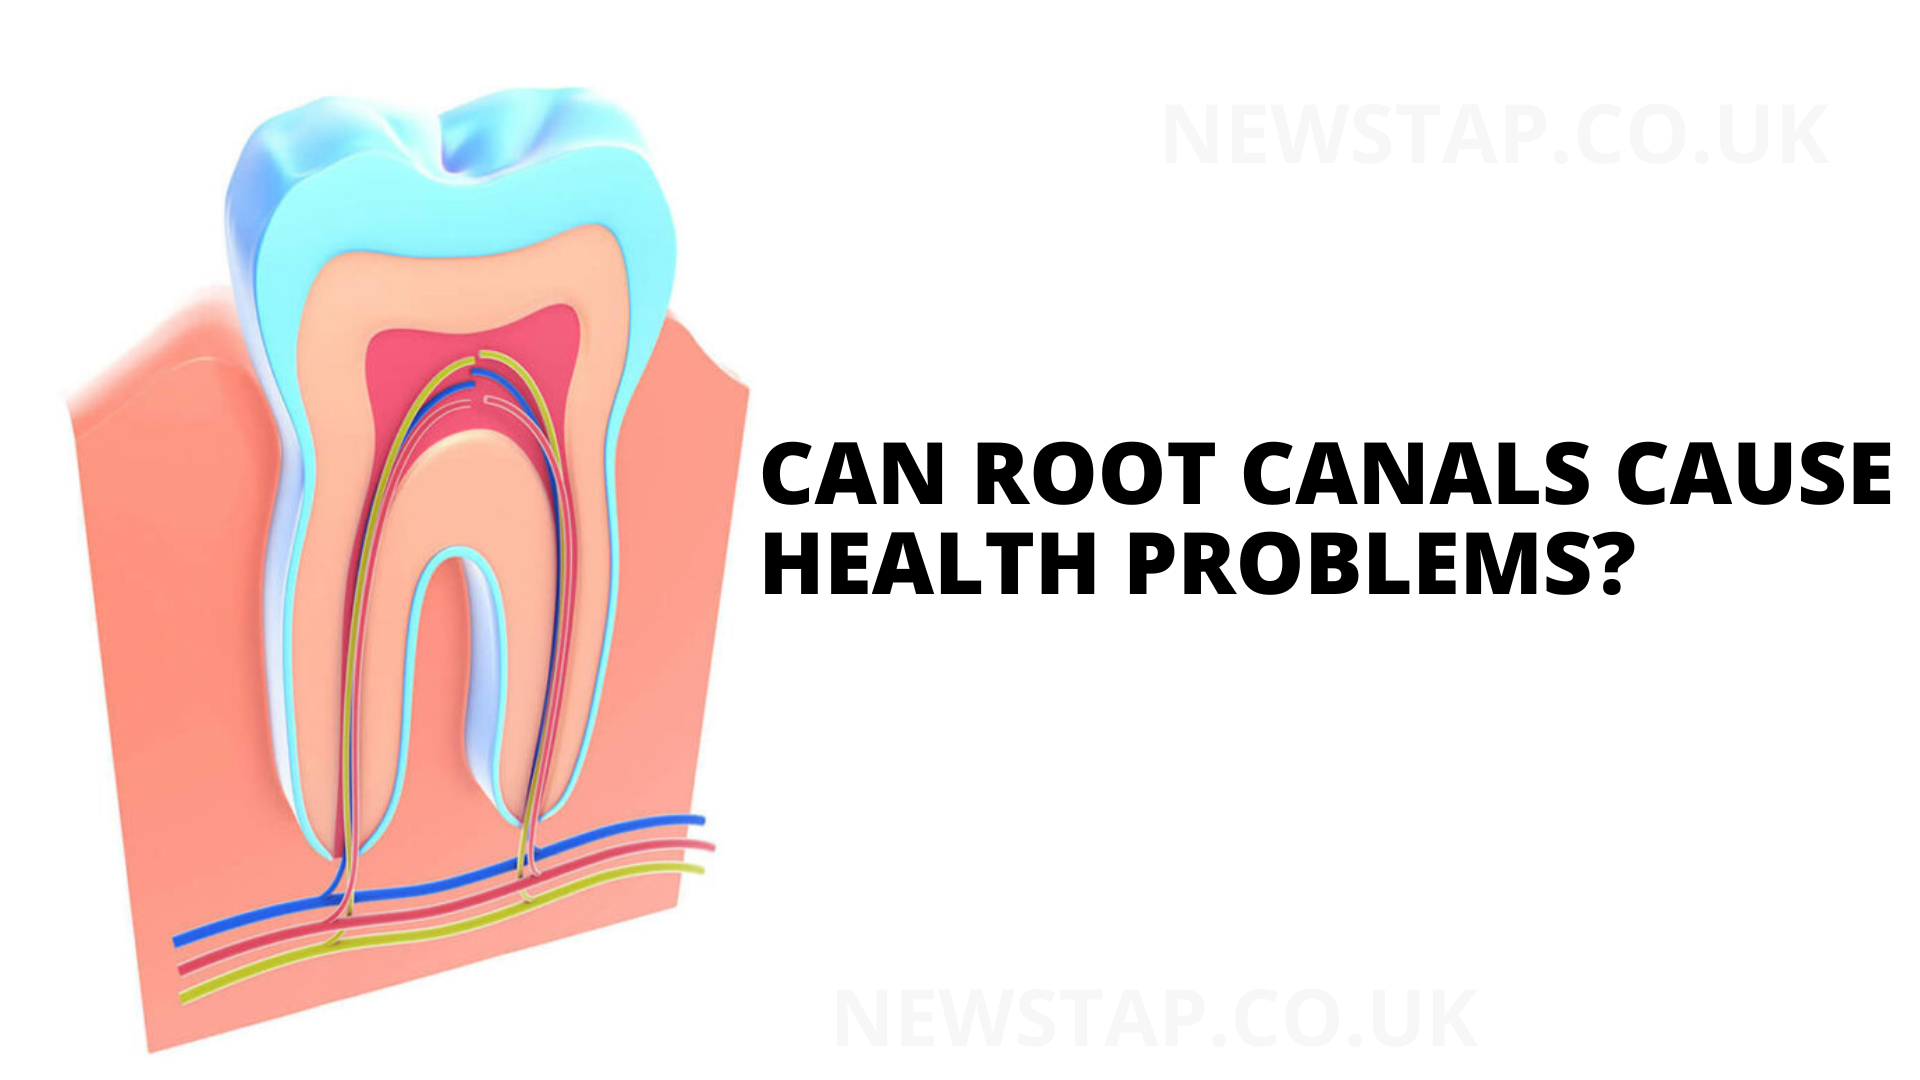 Can root canals cause health problems? doctor say yes? - newstap.co.uk